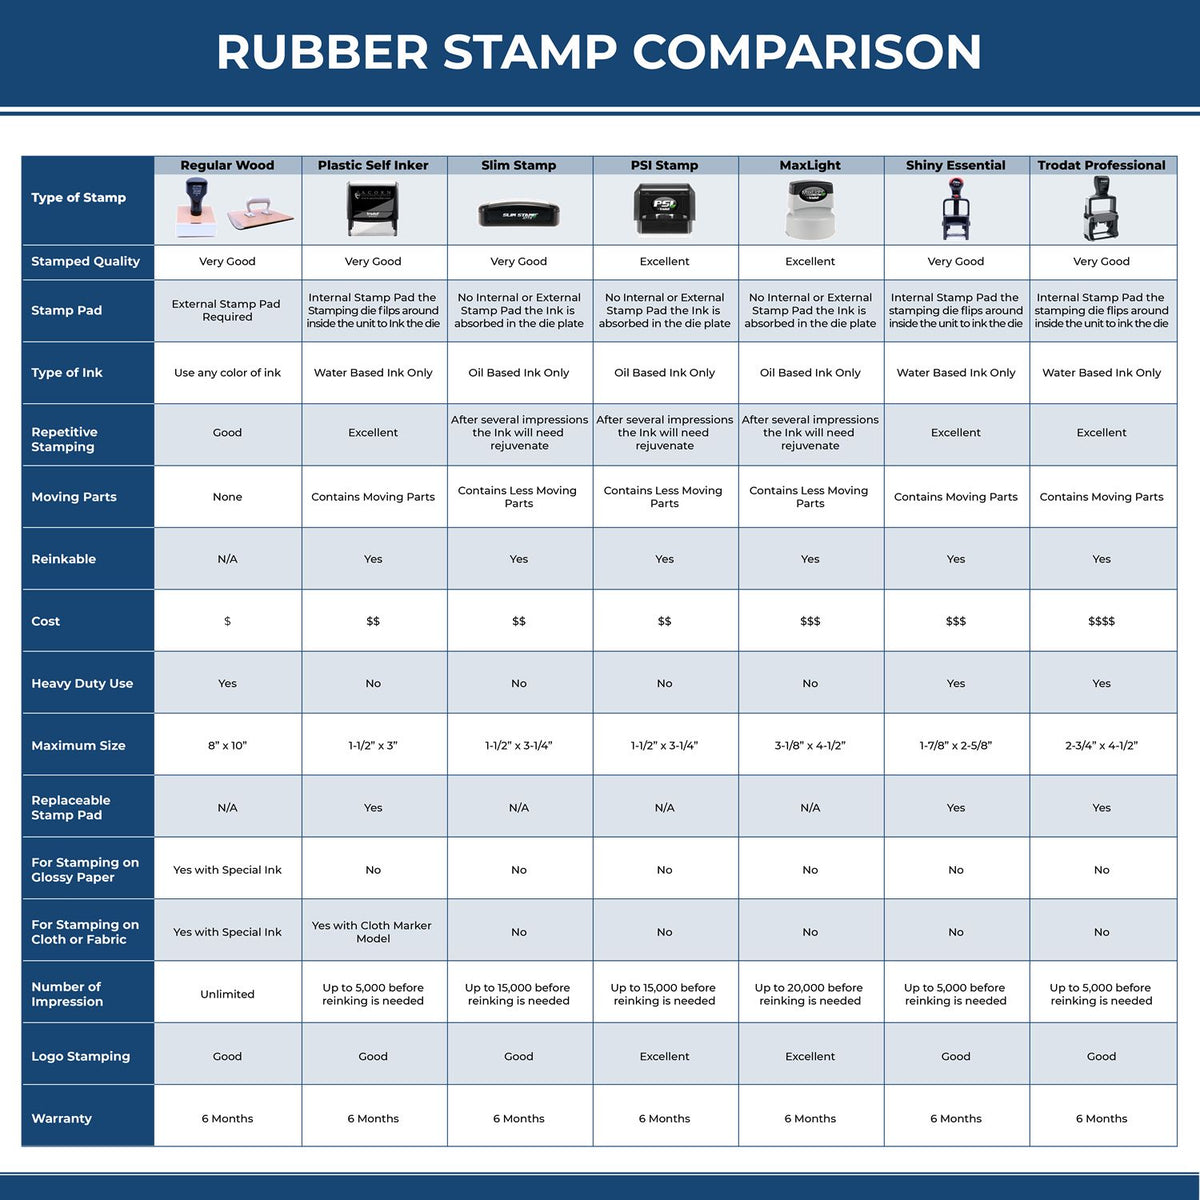 A comparison chart for the different types of mount models available for the Delaware Professional Engineer Seal Stamp.